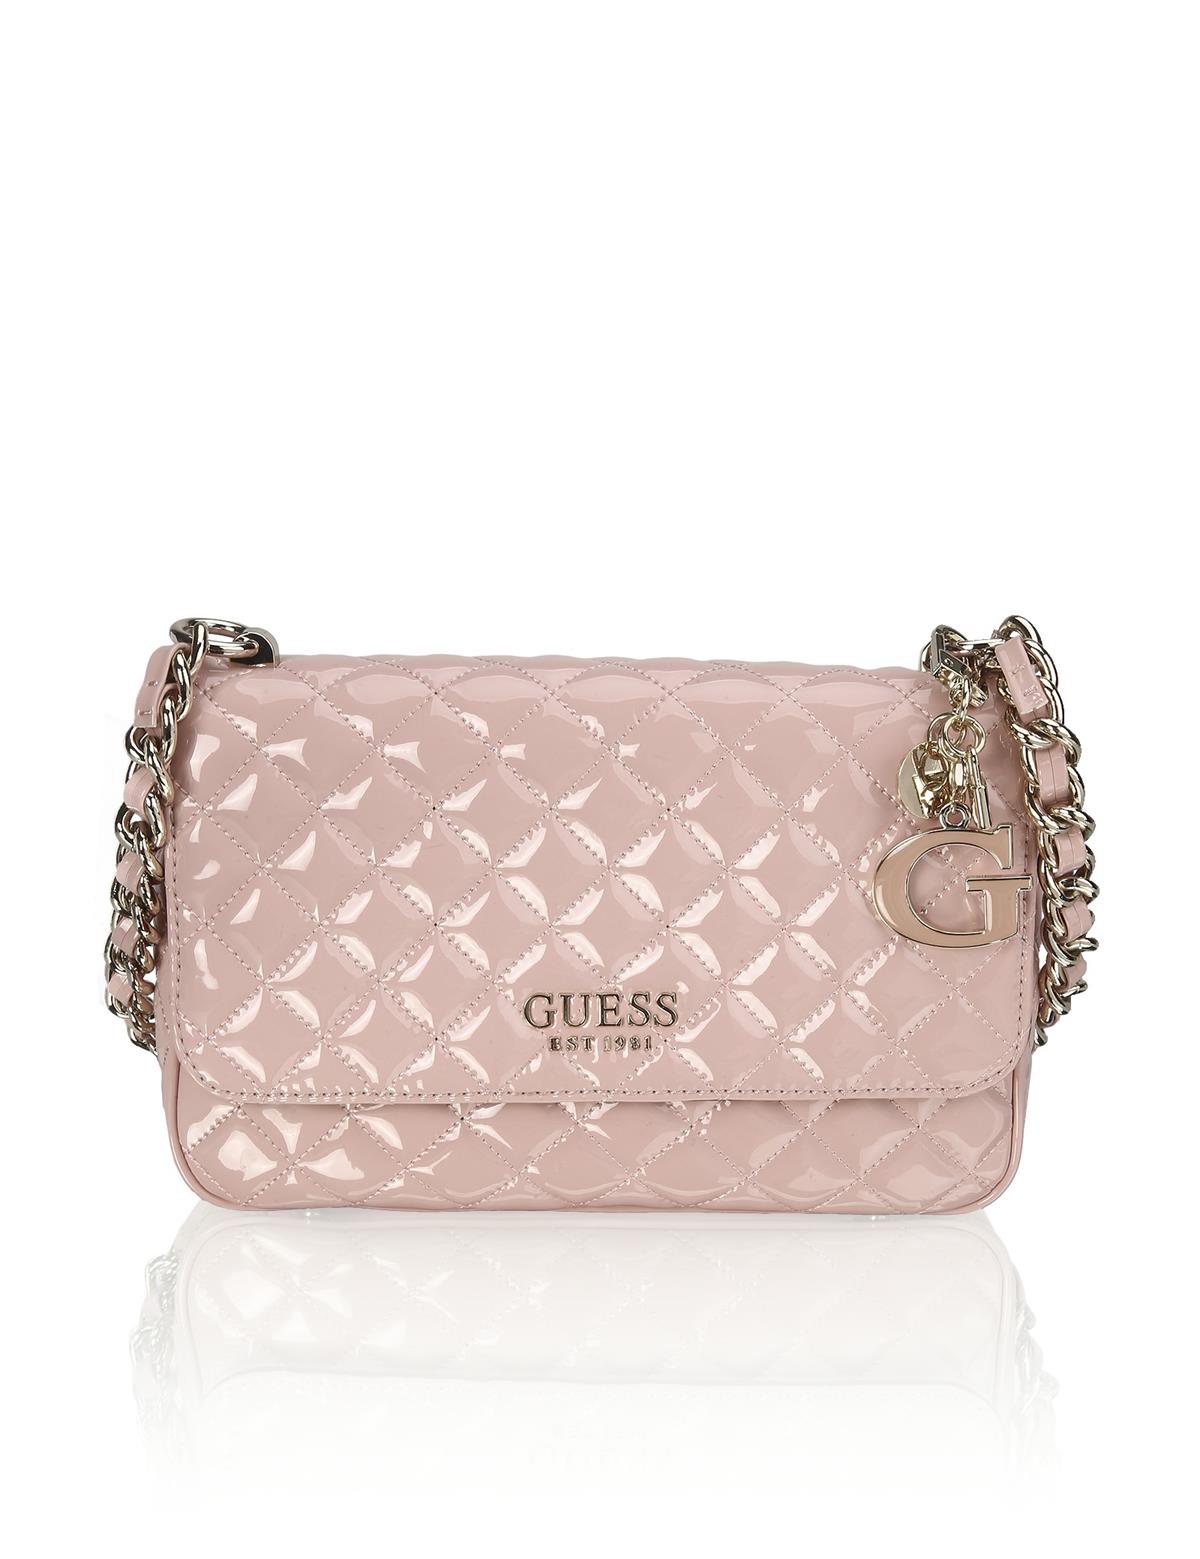 HUMANIC 18 Guess Quilted Bag EUR 130 6131001937